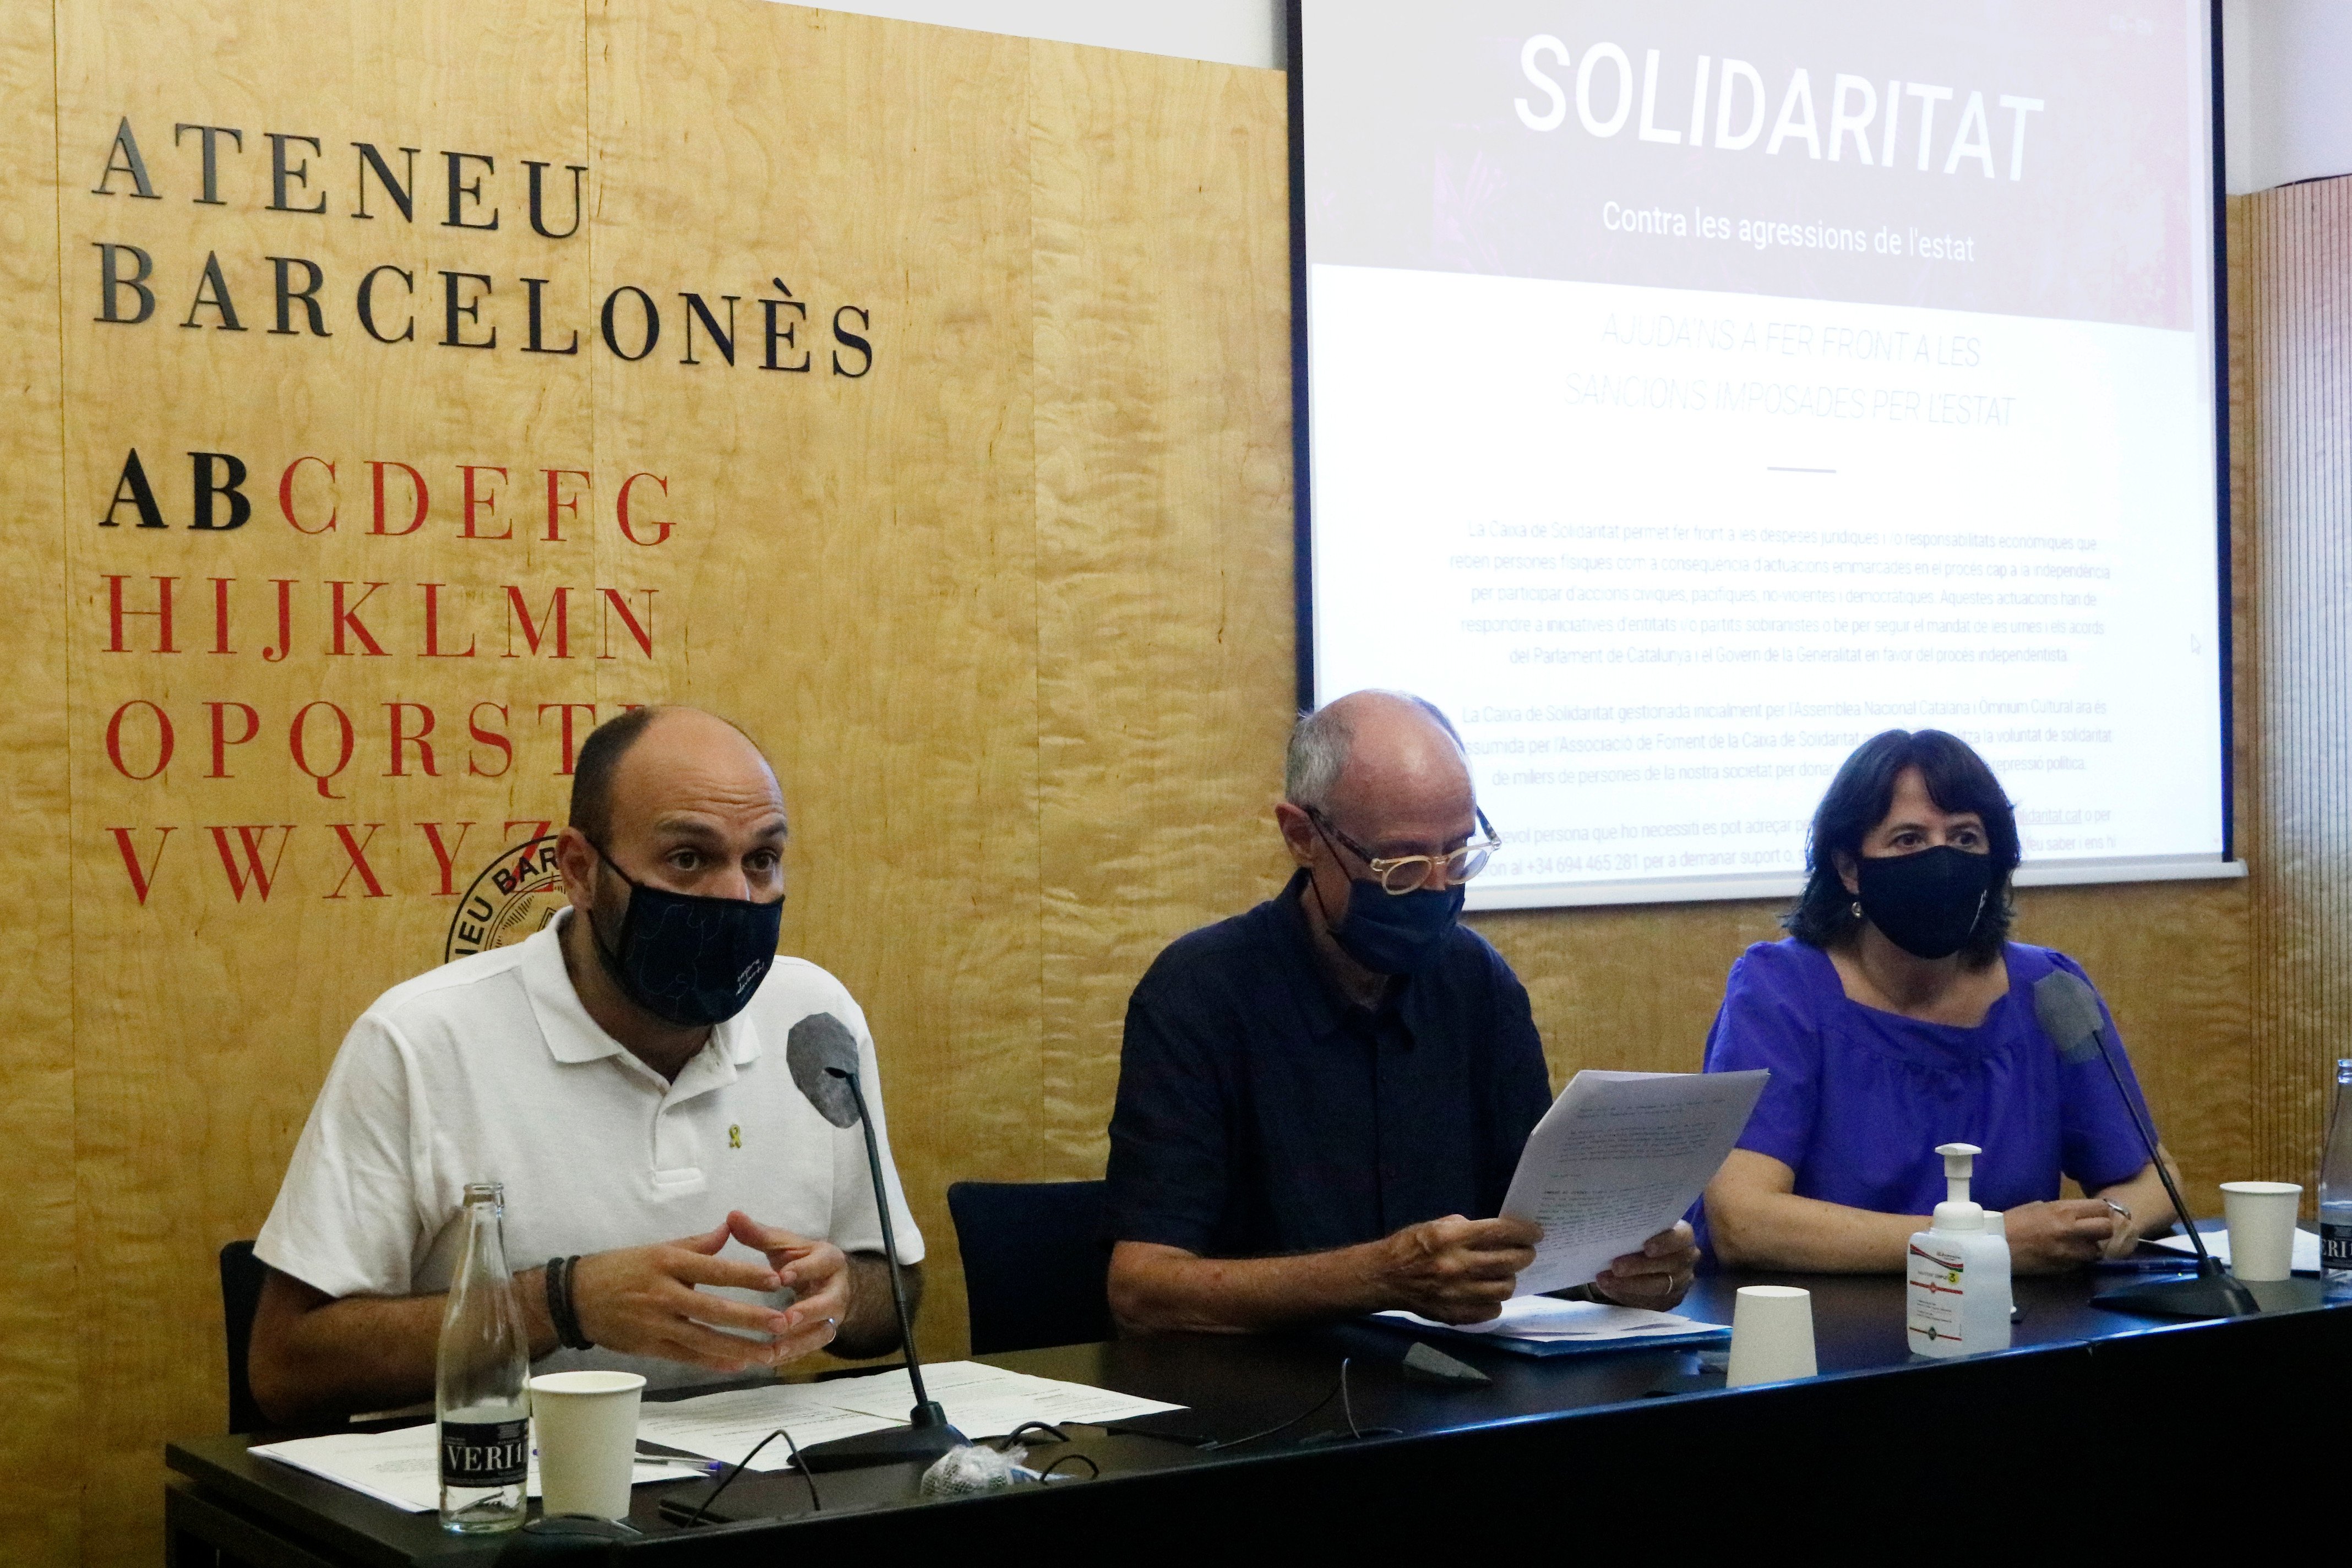 Solidarity Fund: "The banks said 'no' out of fear of Spanish state reprisals"